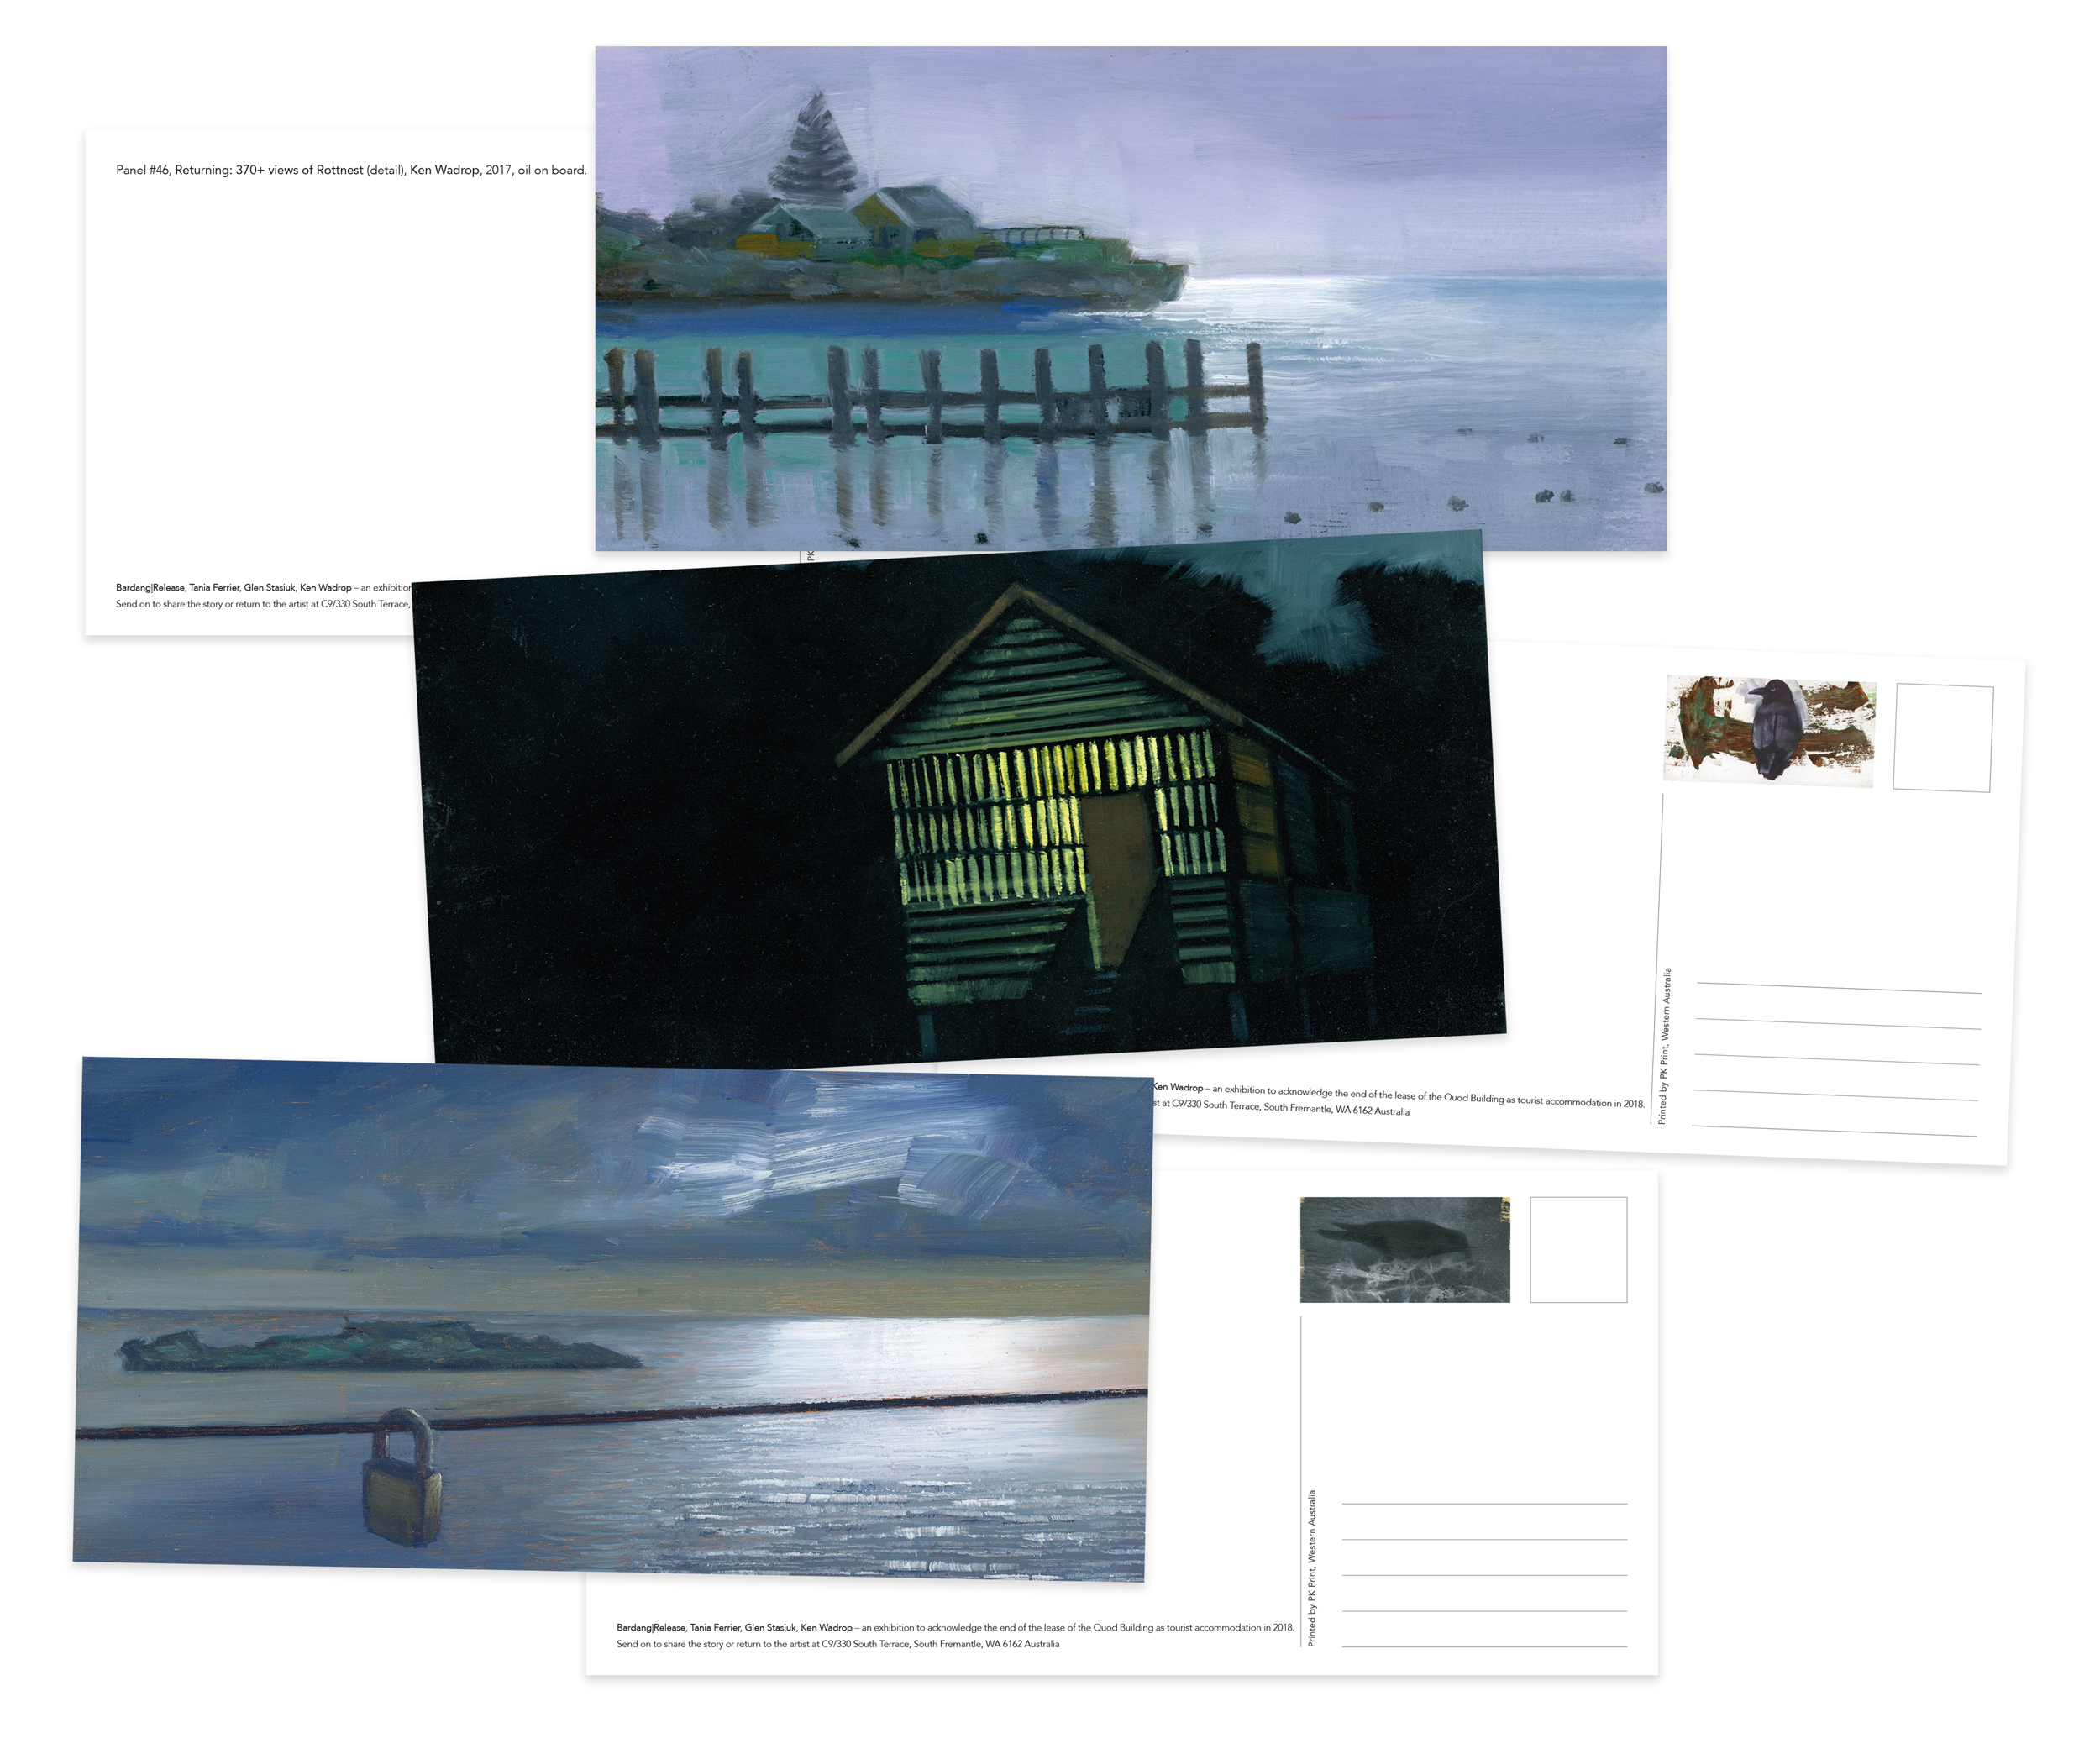 Bardang-Release-series of postcards with images of individual panels from 'Returning' Ken Wadrop.